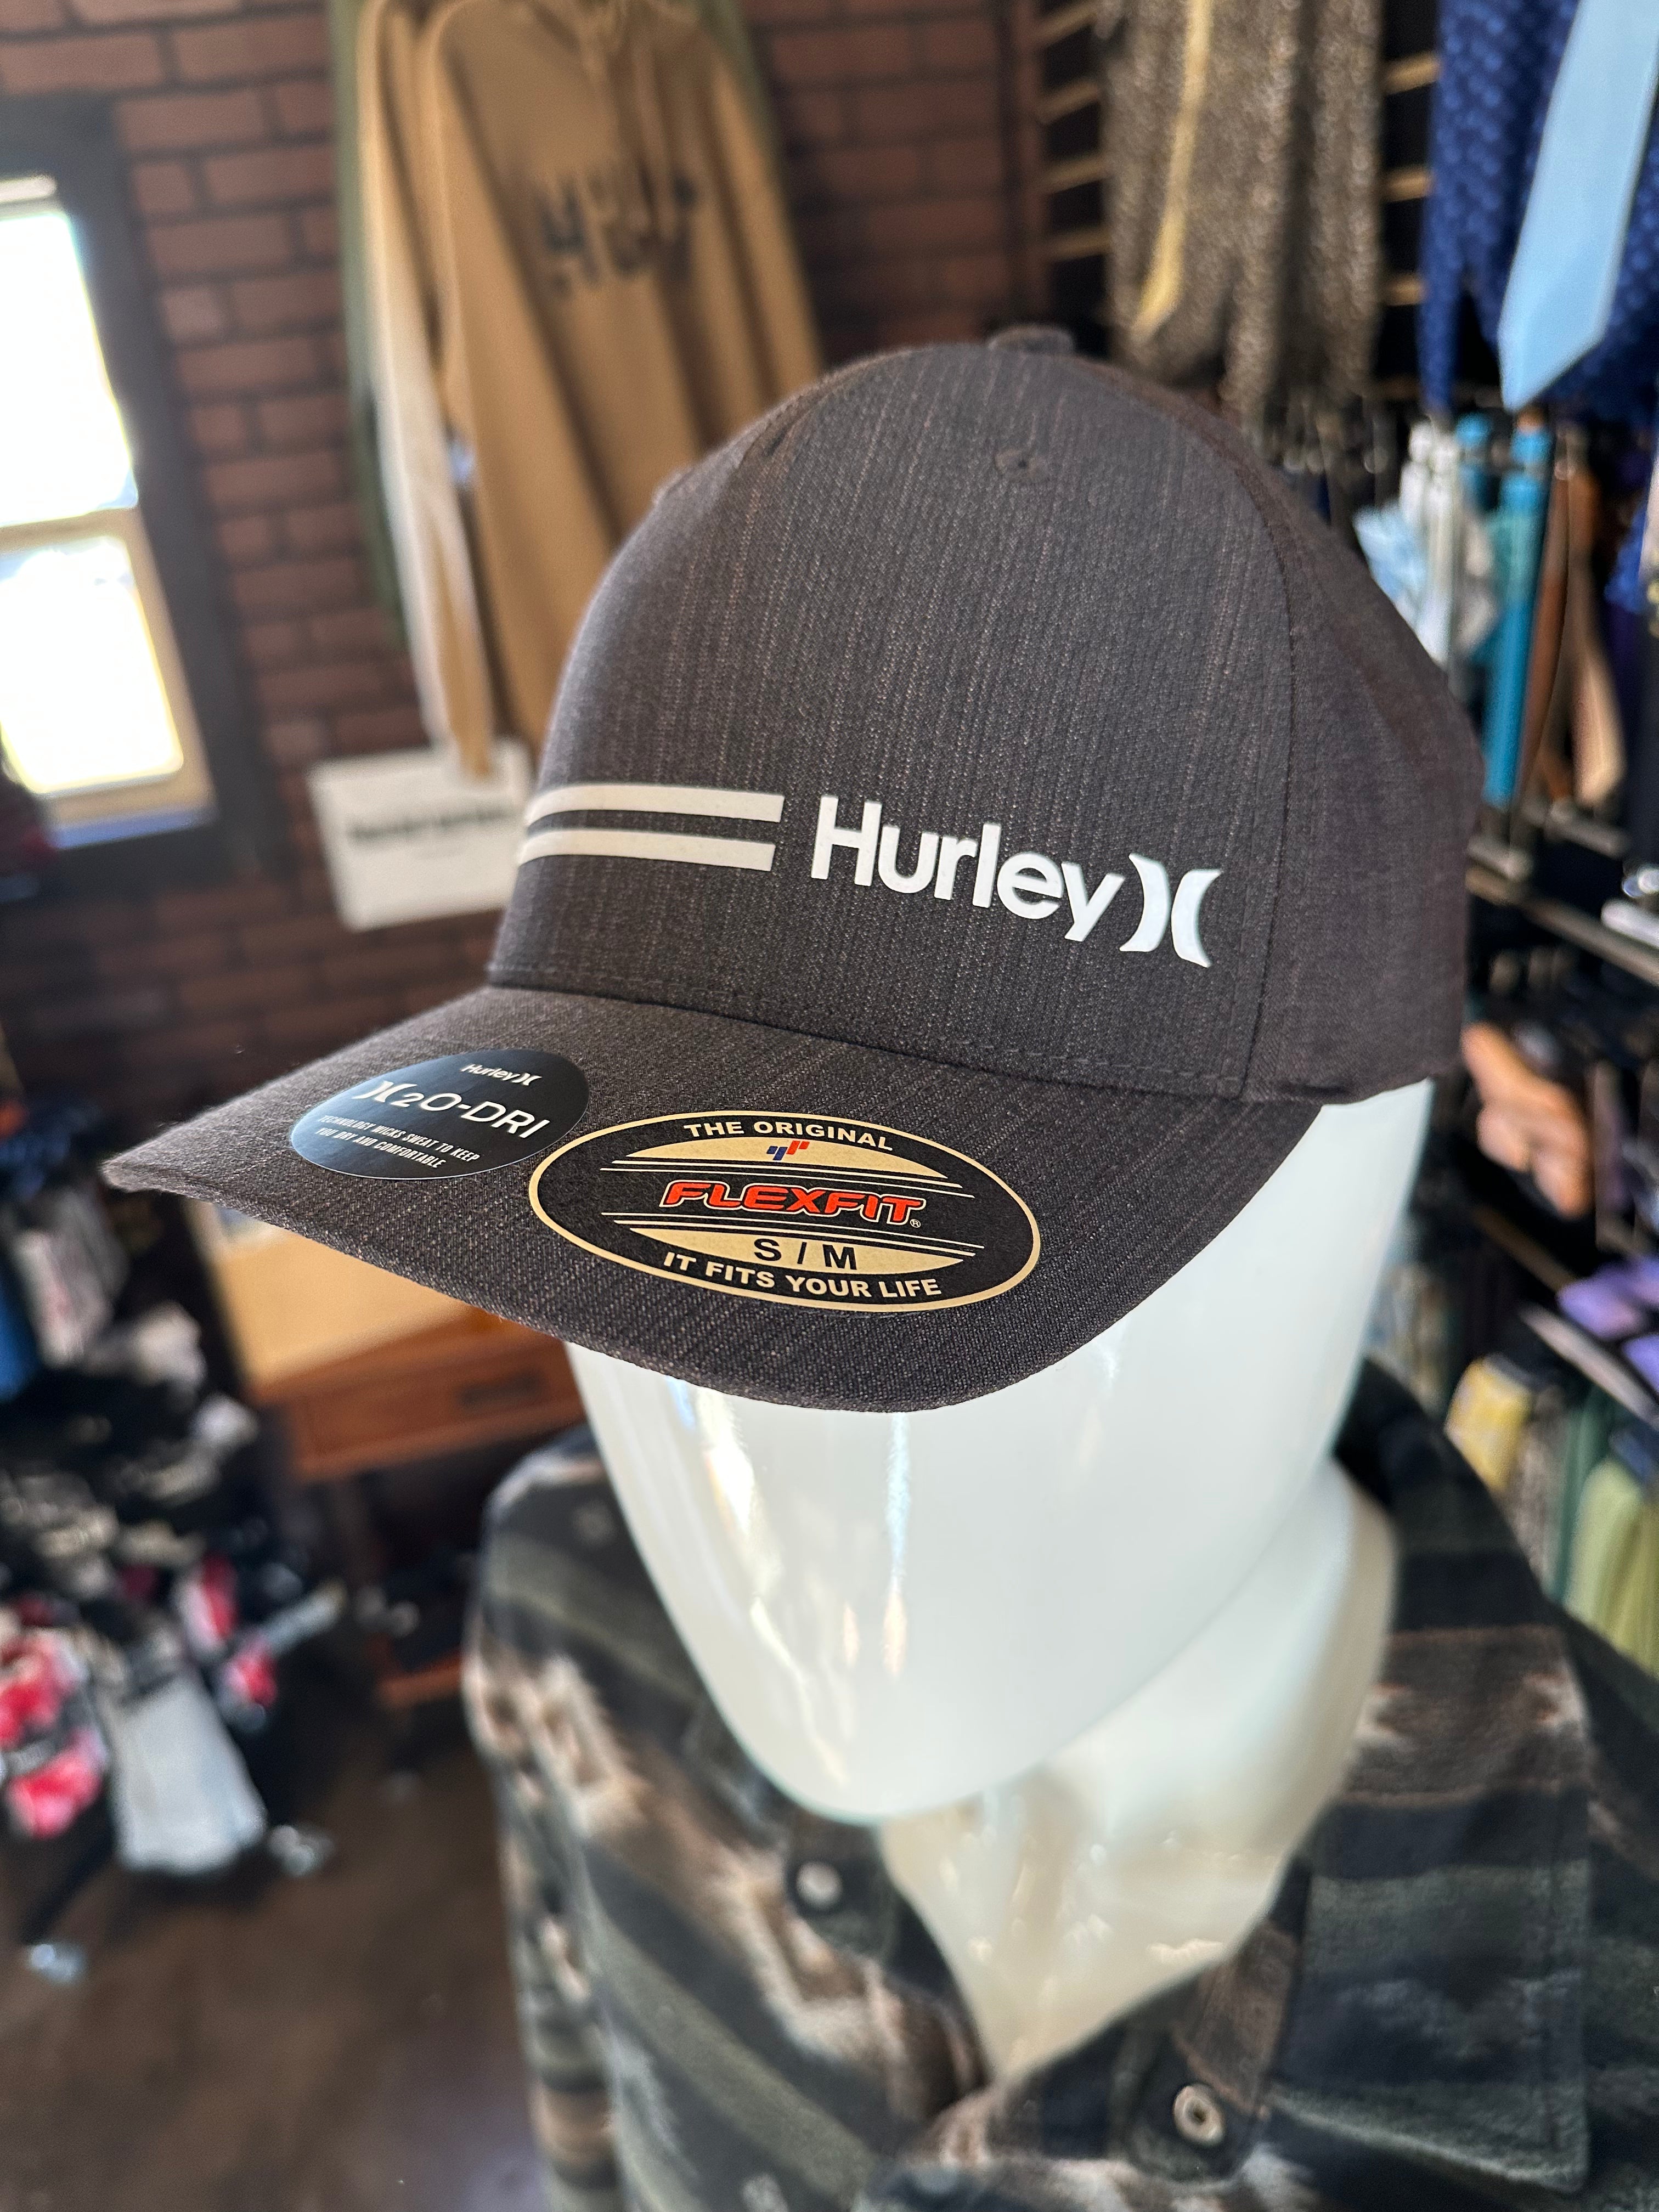 Clothing Line 9th H20 Hat Dri Street Co – HURLEY Up